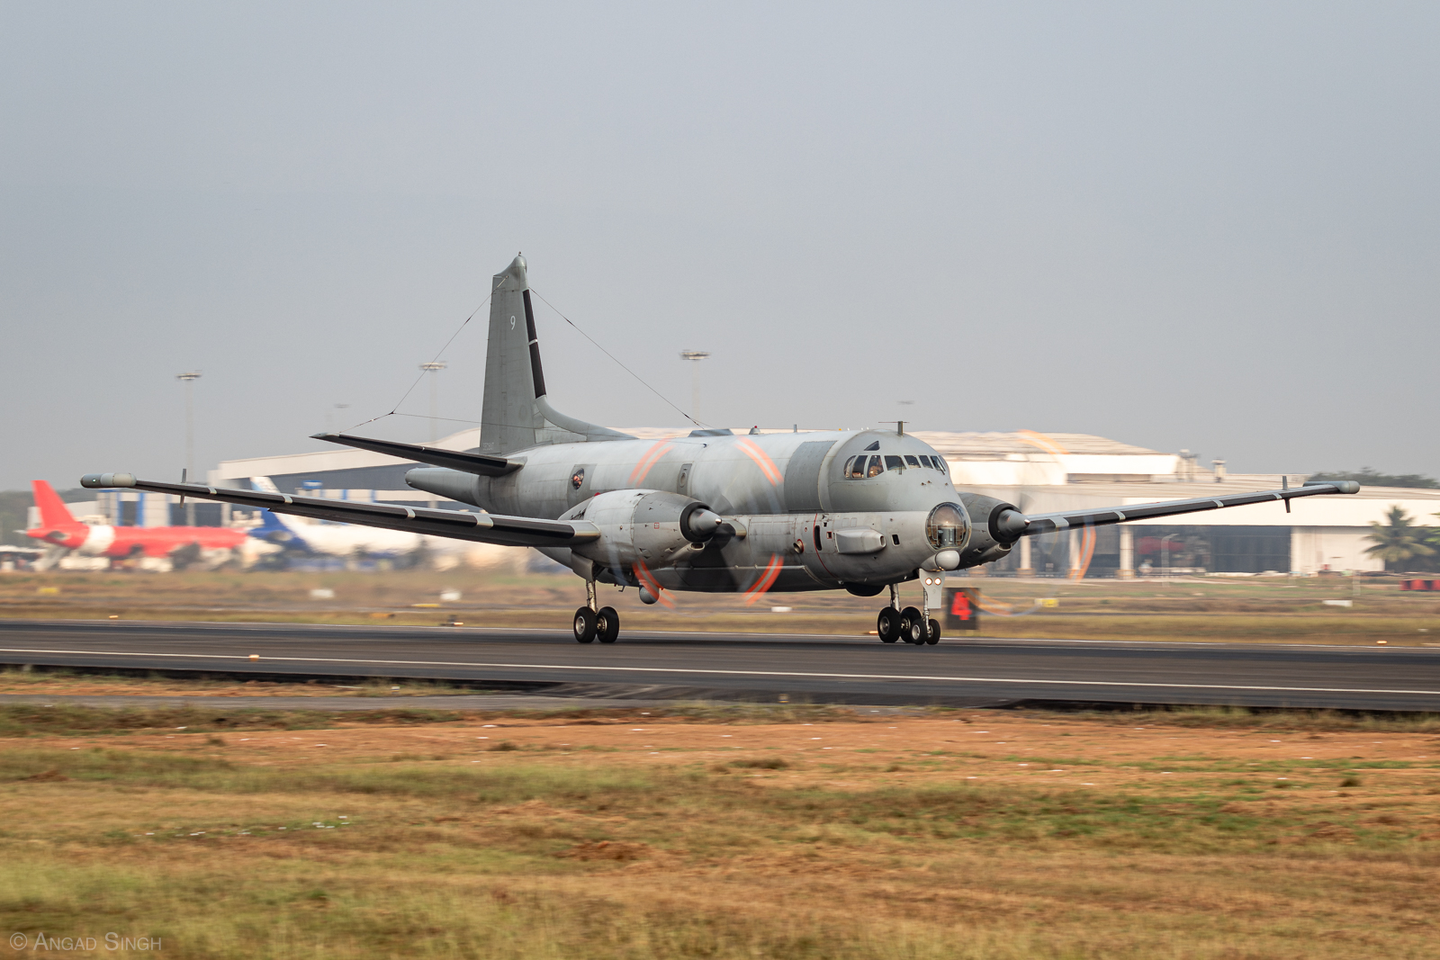 A French Atlantique 2 from Flotille 23F and assigned to the French Indian Ocean Command (ALINDIEN) was the only foreign patrol aircraft at the exercise. <em>Angad Singh</em>